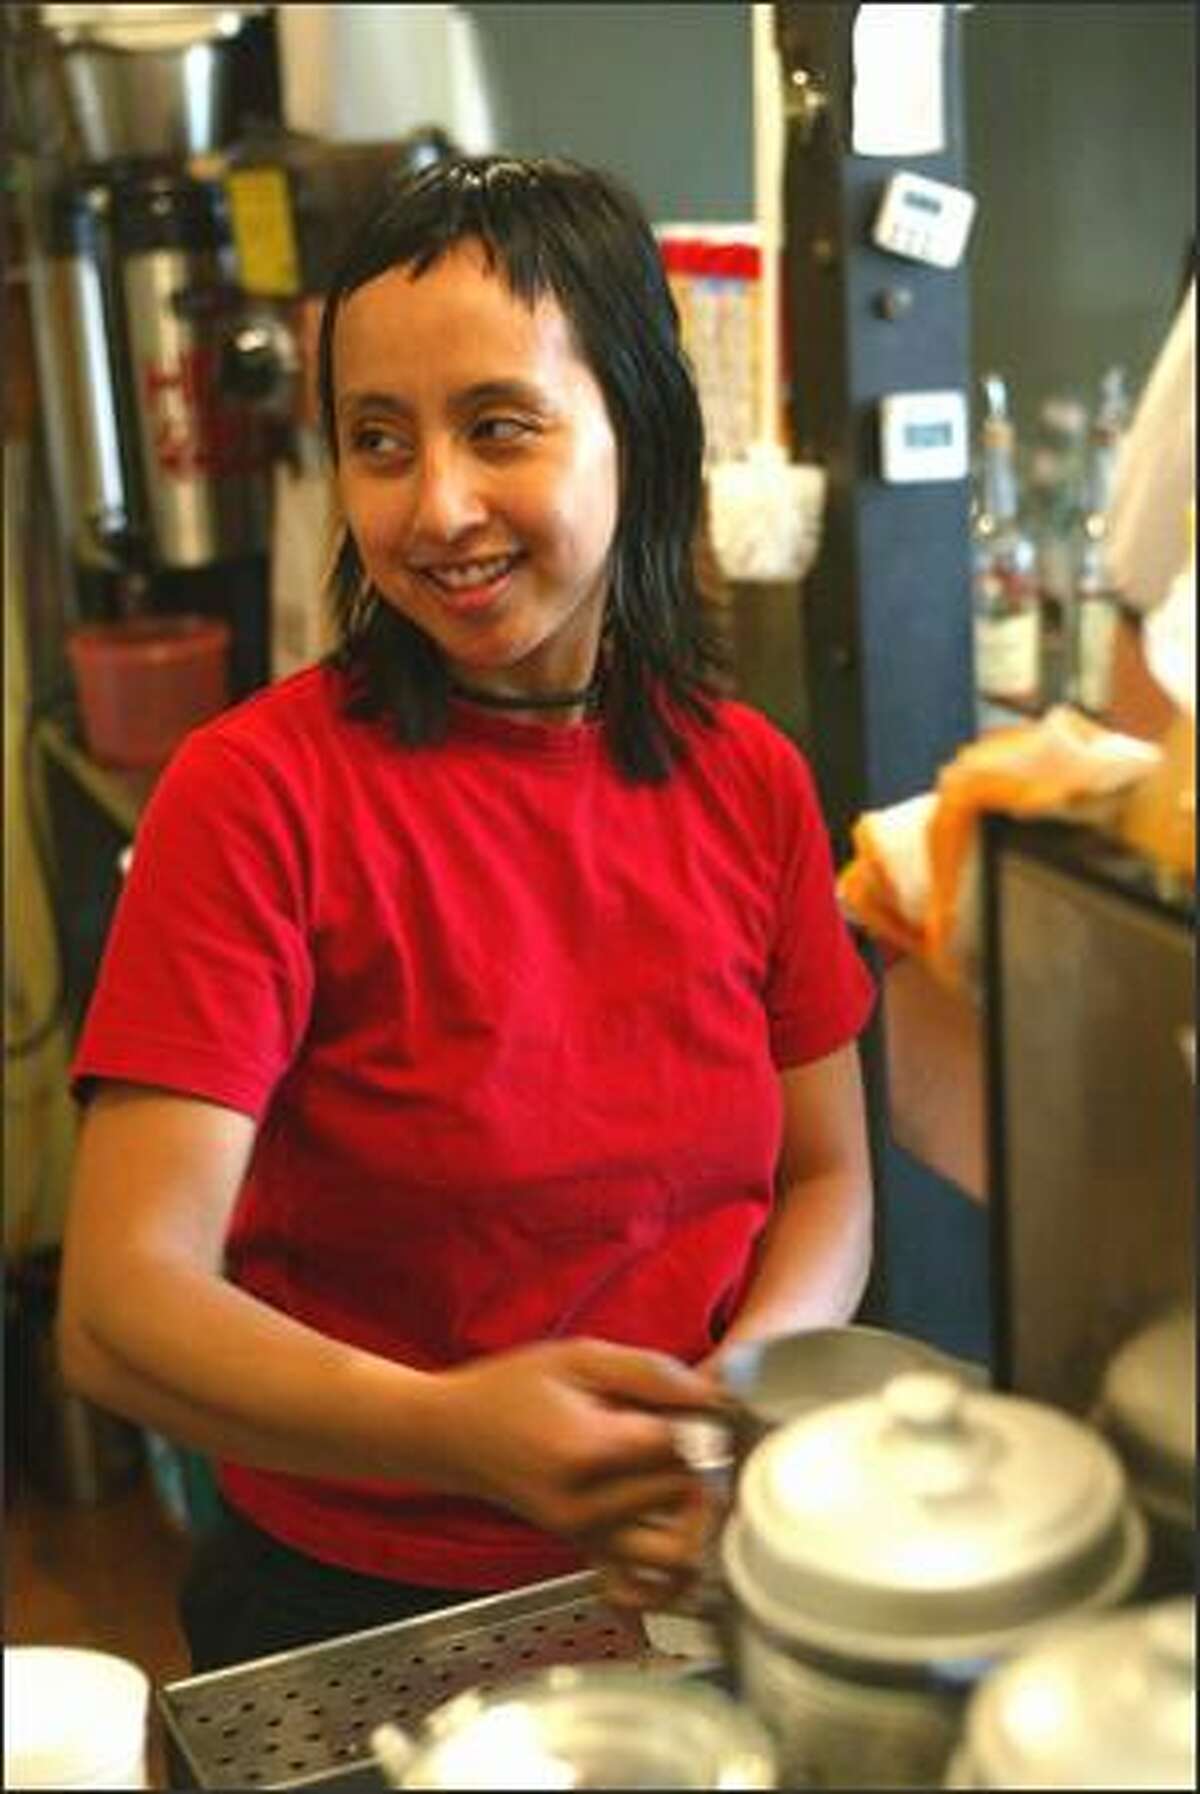 Coffee lovers searching for Sweetness should visit Hines Public Market Coffee on Eastlake for Bronwen Serna's specialty.